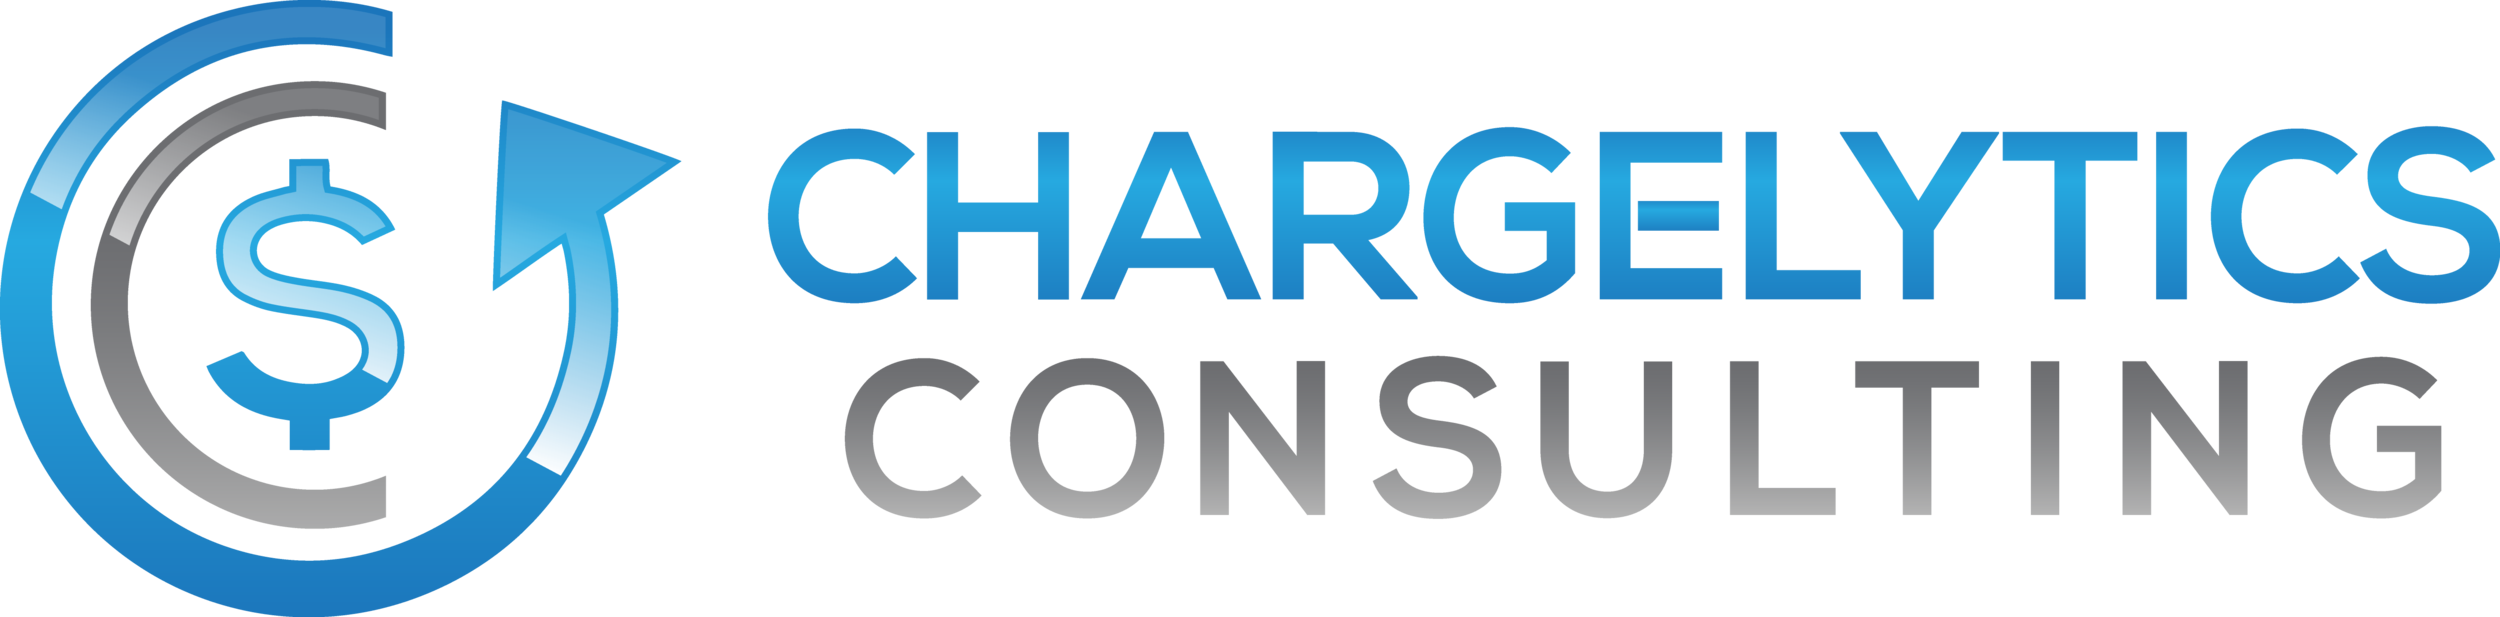 Chargelytics Consulting